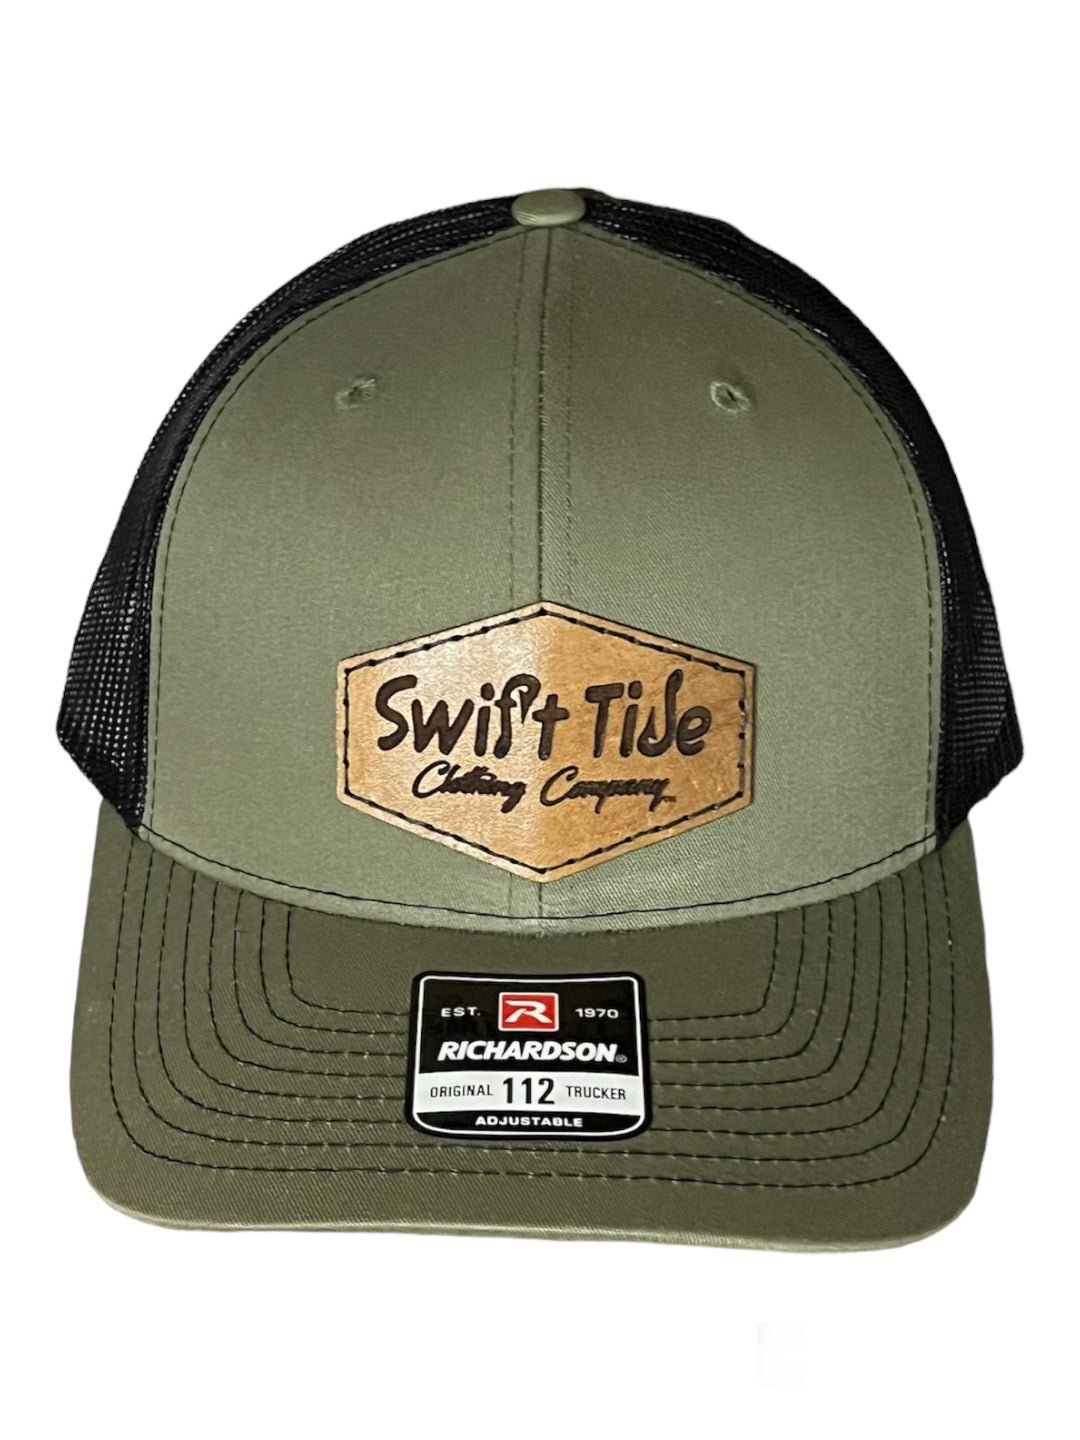 Hexagon Leather Patch Hat - Swift Tide Clothing Company